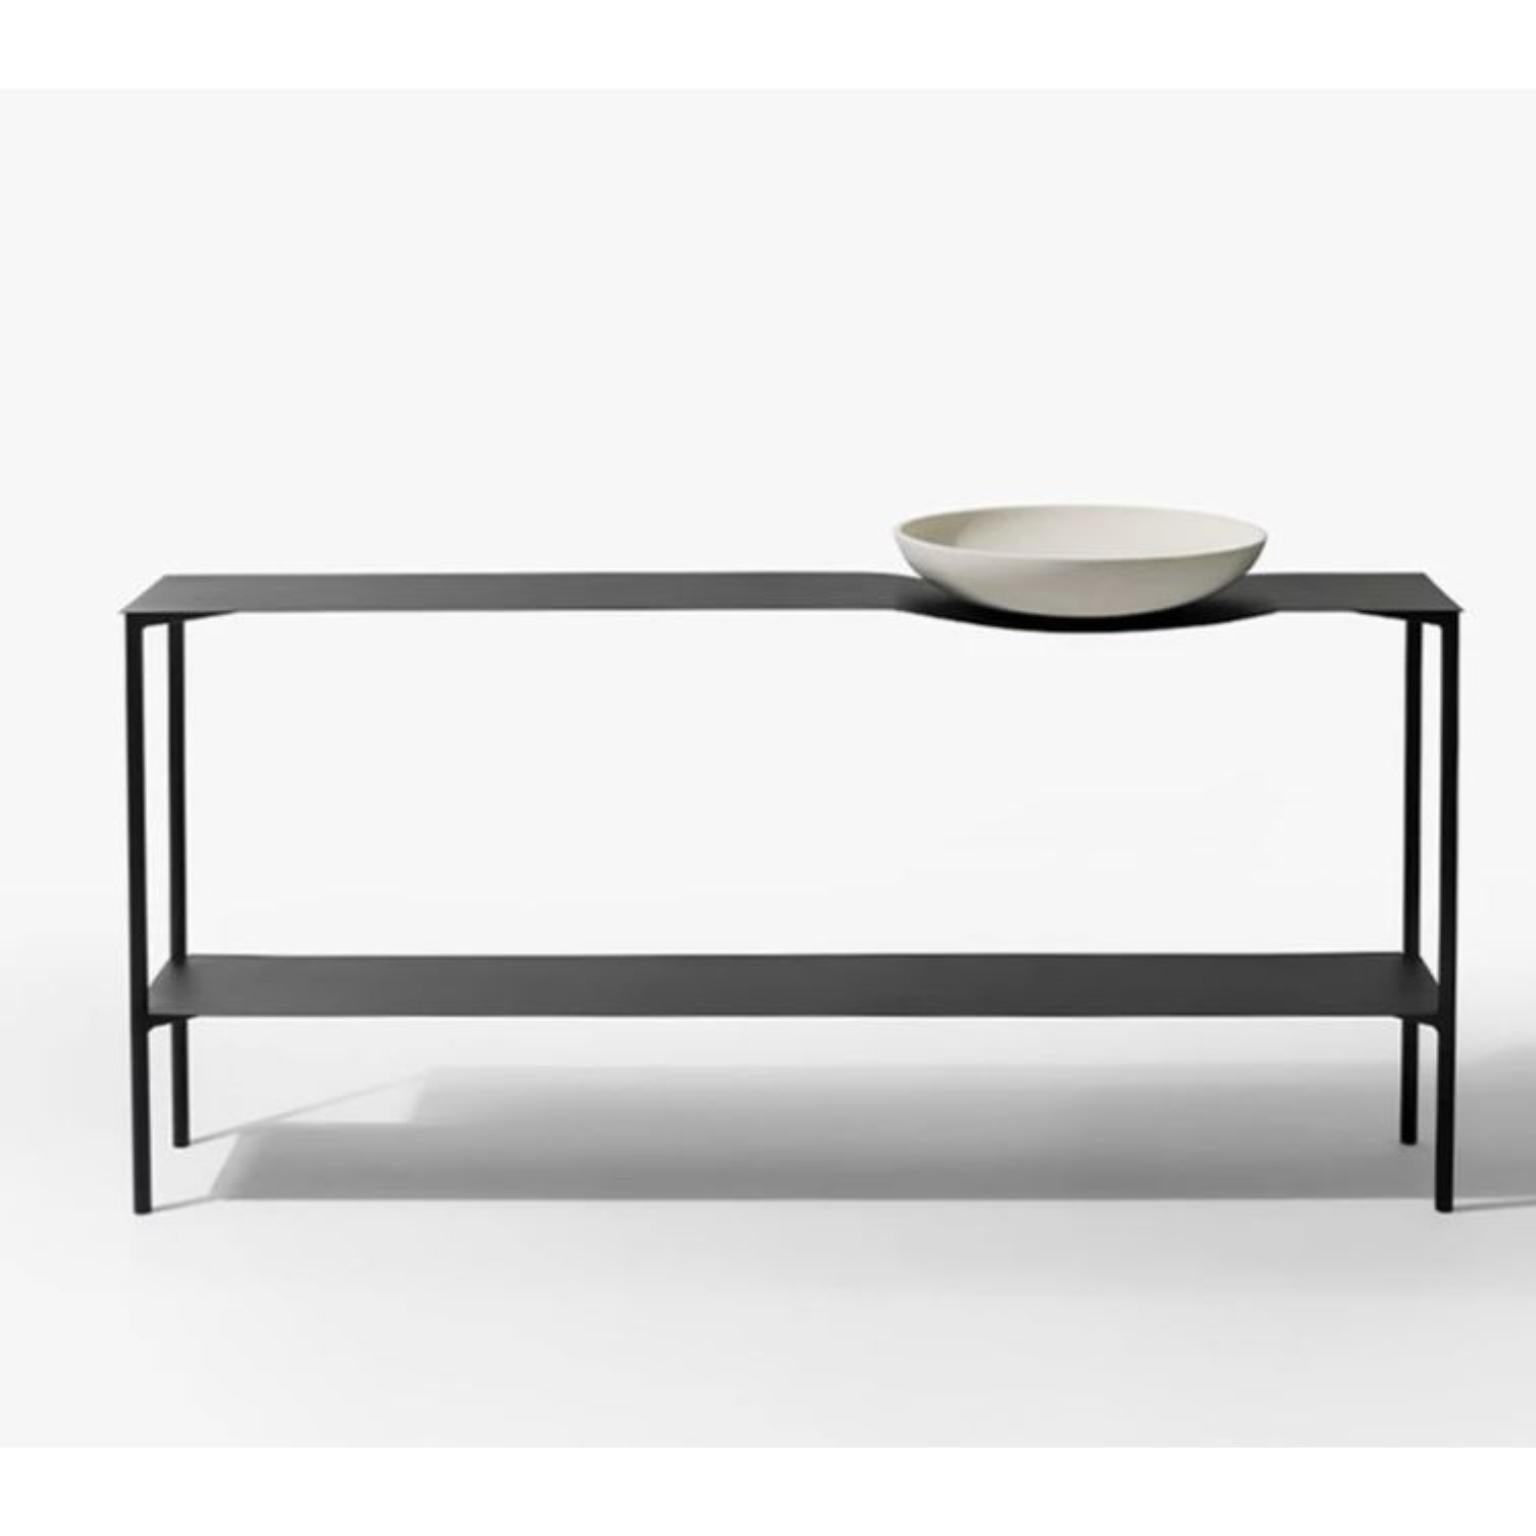 Black Bowl Console Table by Wentz
Dimensions: D 45 x W 165 x H 80 cm
Materials: Steel, Ceramic, Stainless Steel.
Coffee table with steel structure and top with textured electrostatic painting. Ceramic “Bowl” fixed to the top with a machined